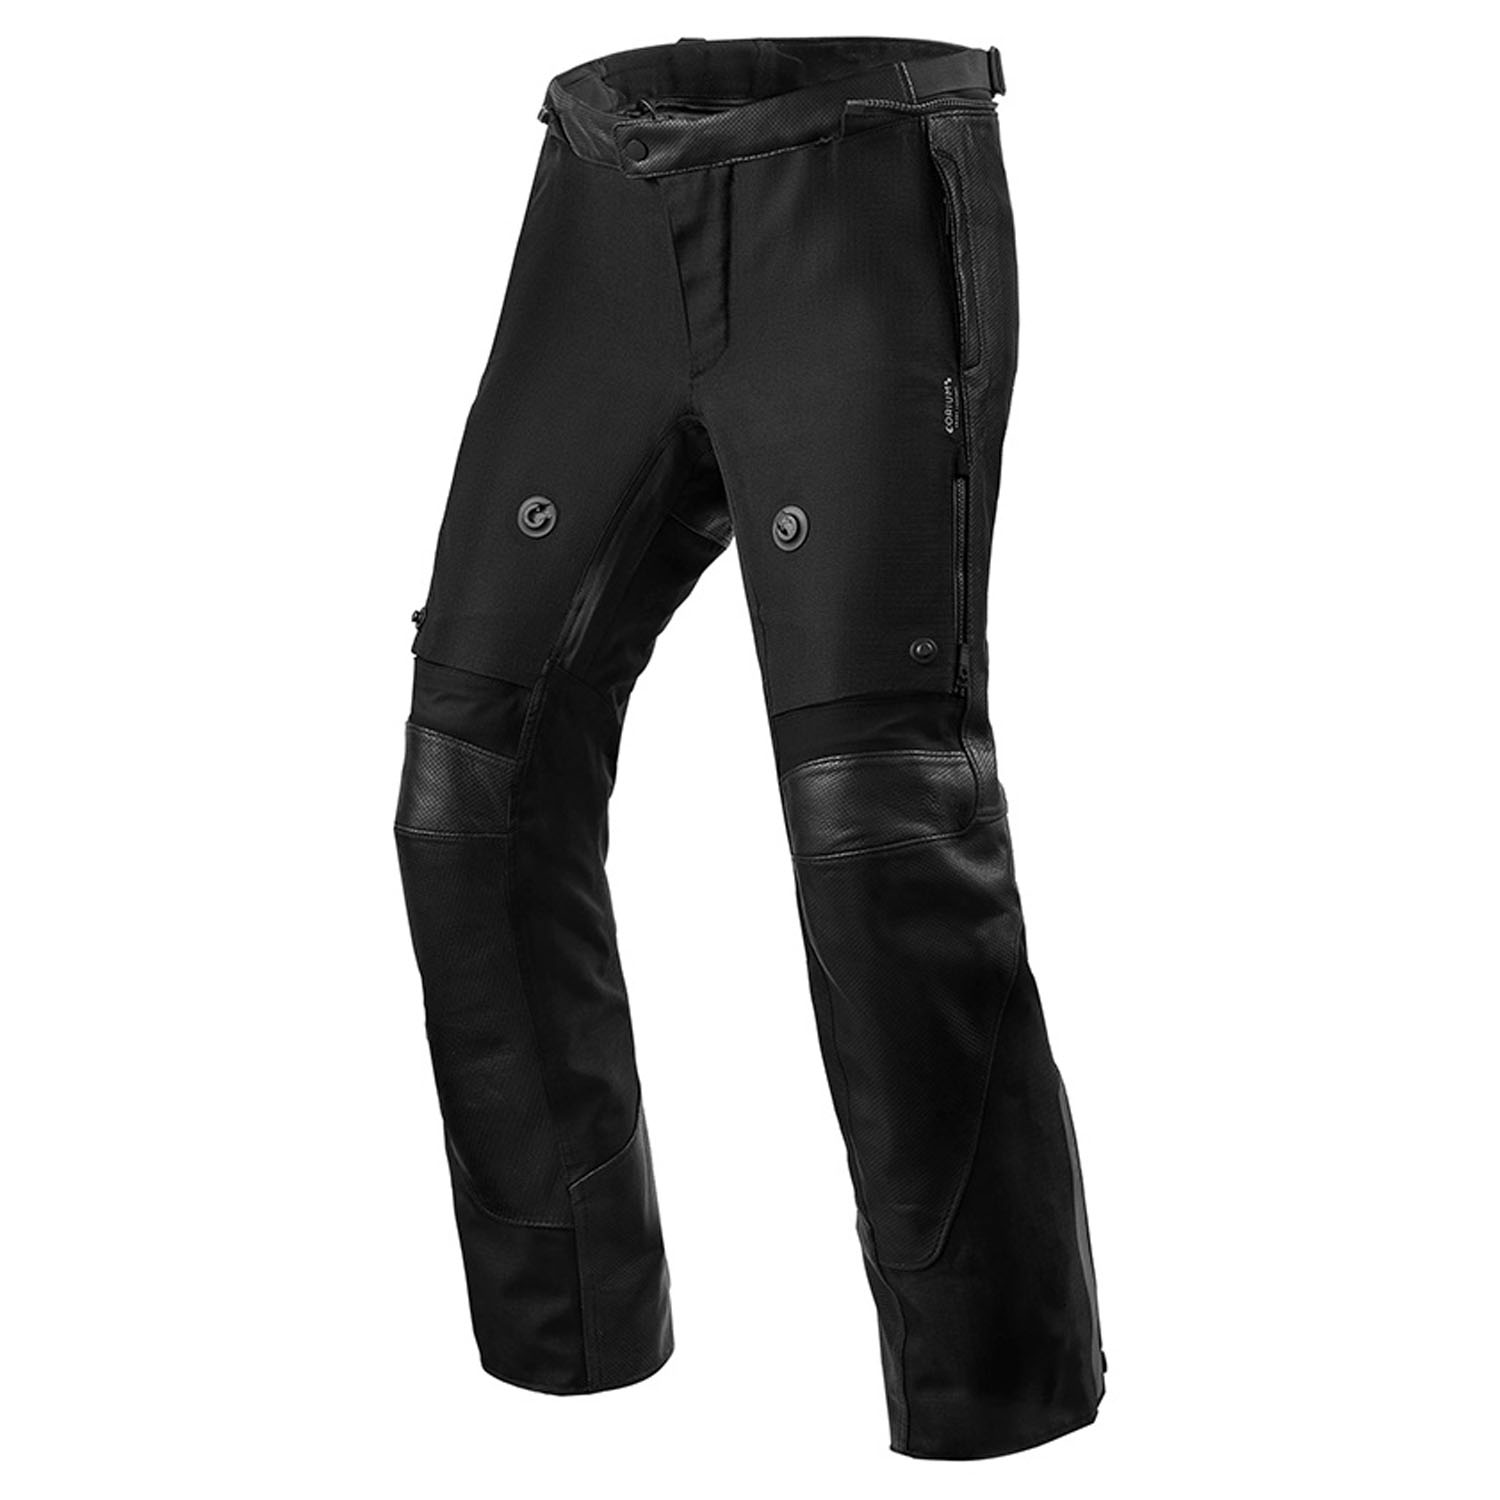 Image of REV'IT! Trousers Valve H2O Black Standard Motorcycle Pants Size 58 ID 8700001315845